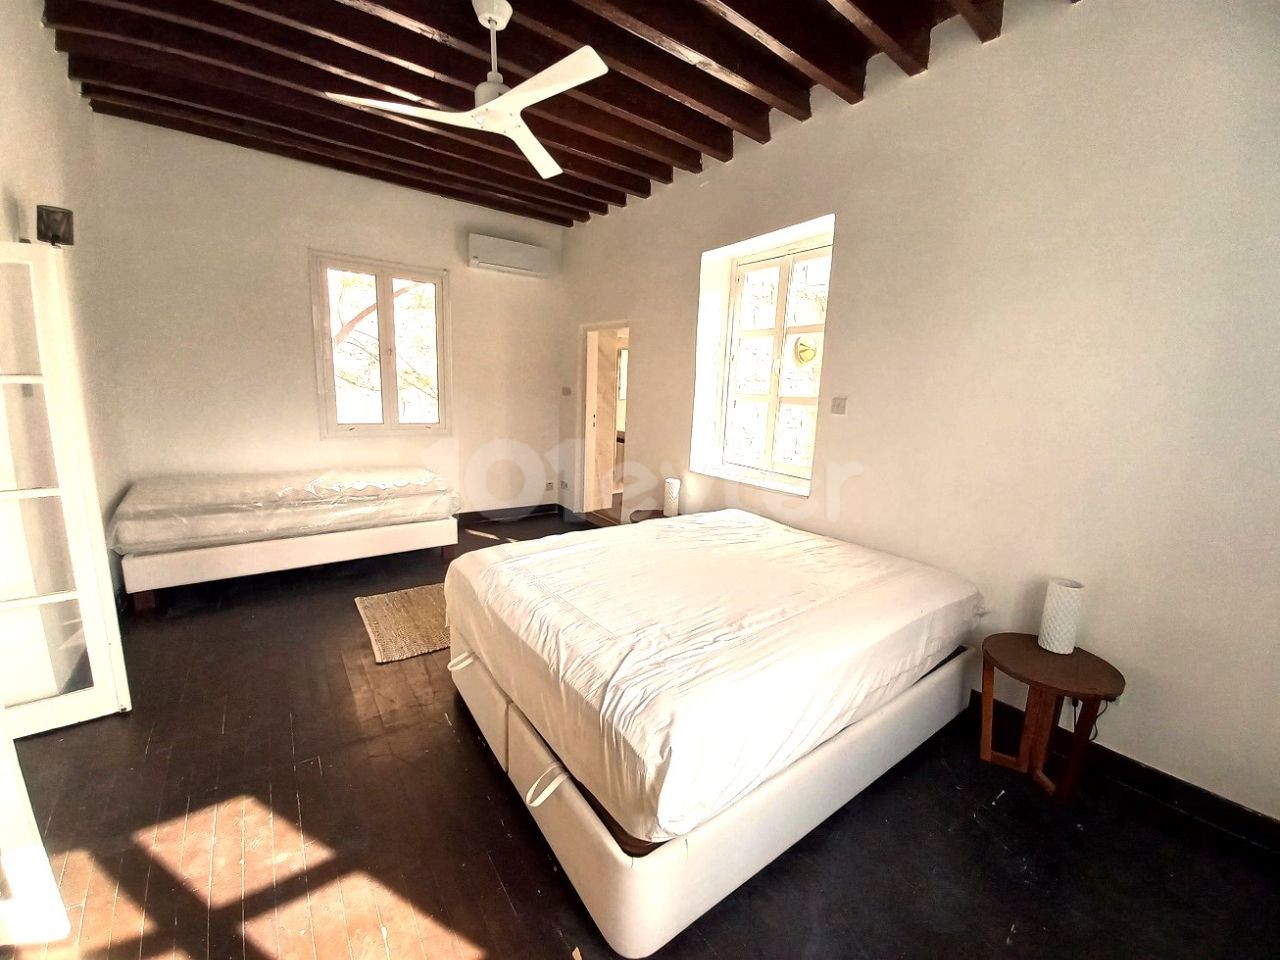 2 Bedroom Traditional Cypriot House in the Turkish Quarter! 